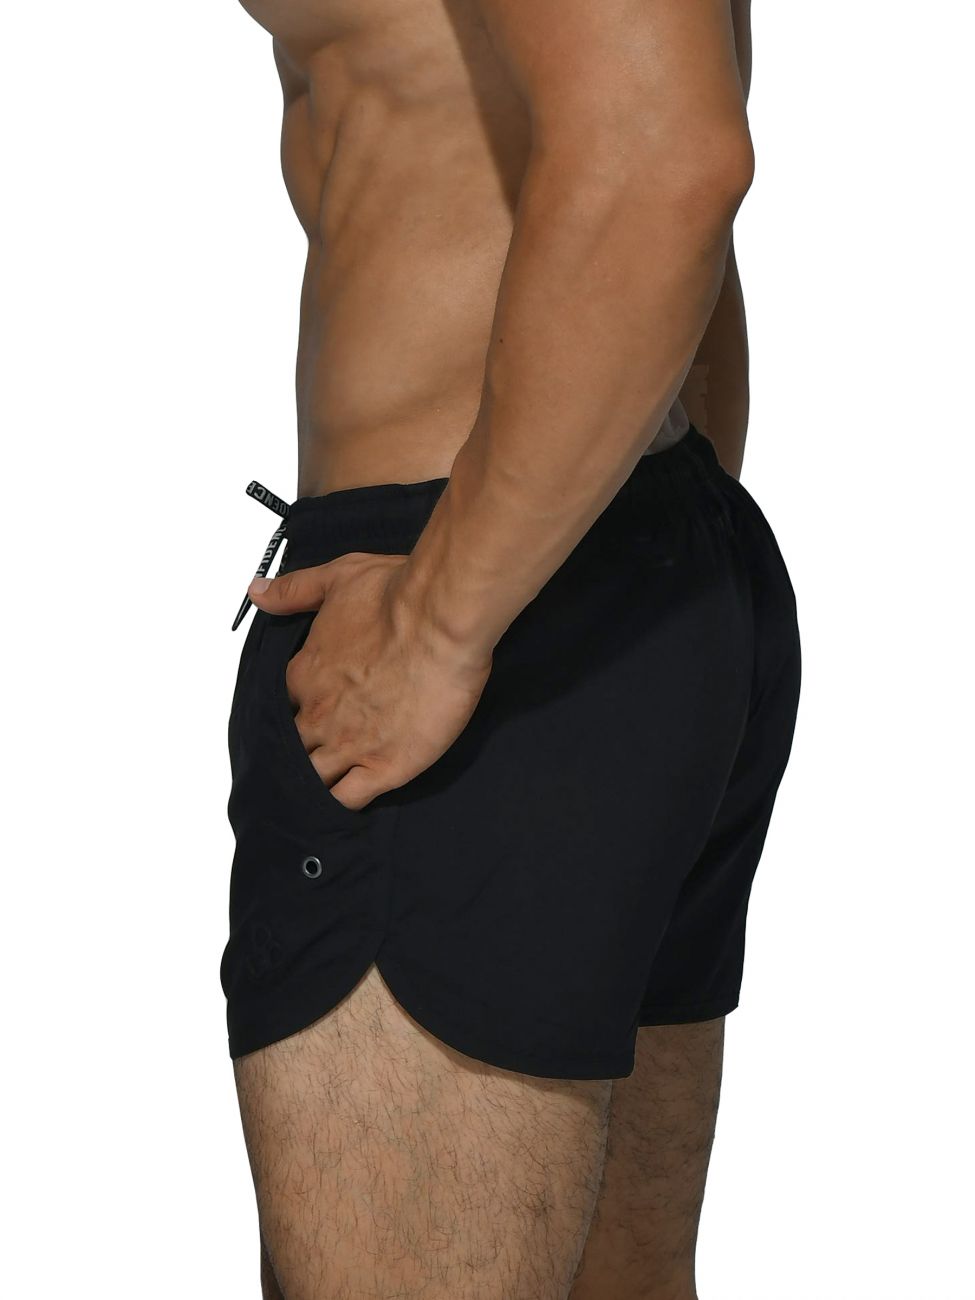 Private Structure Befit Sweat Athletic Shorts